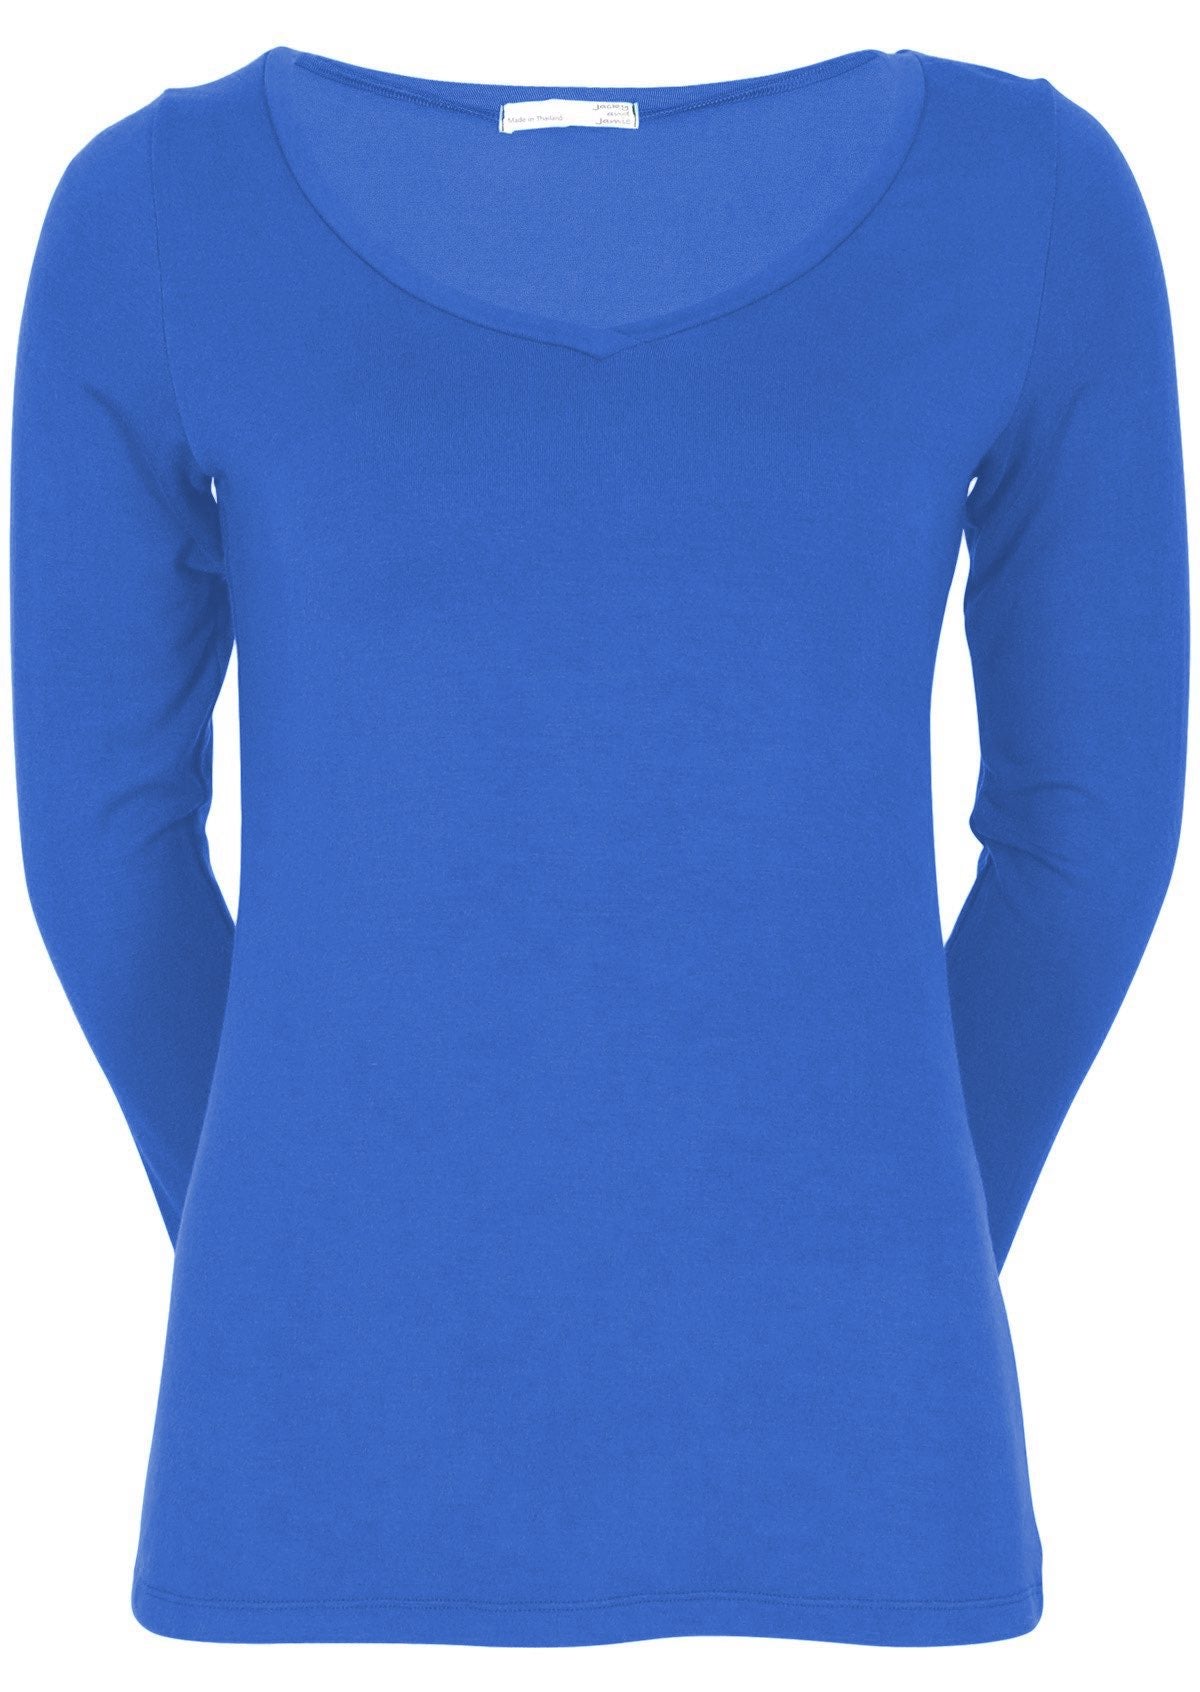 Front view of women's blue long sleeve stretch v-neck soft rayon top.